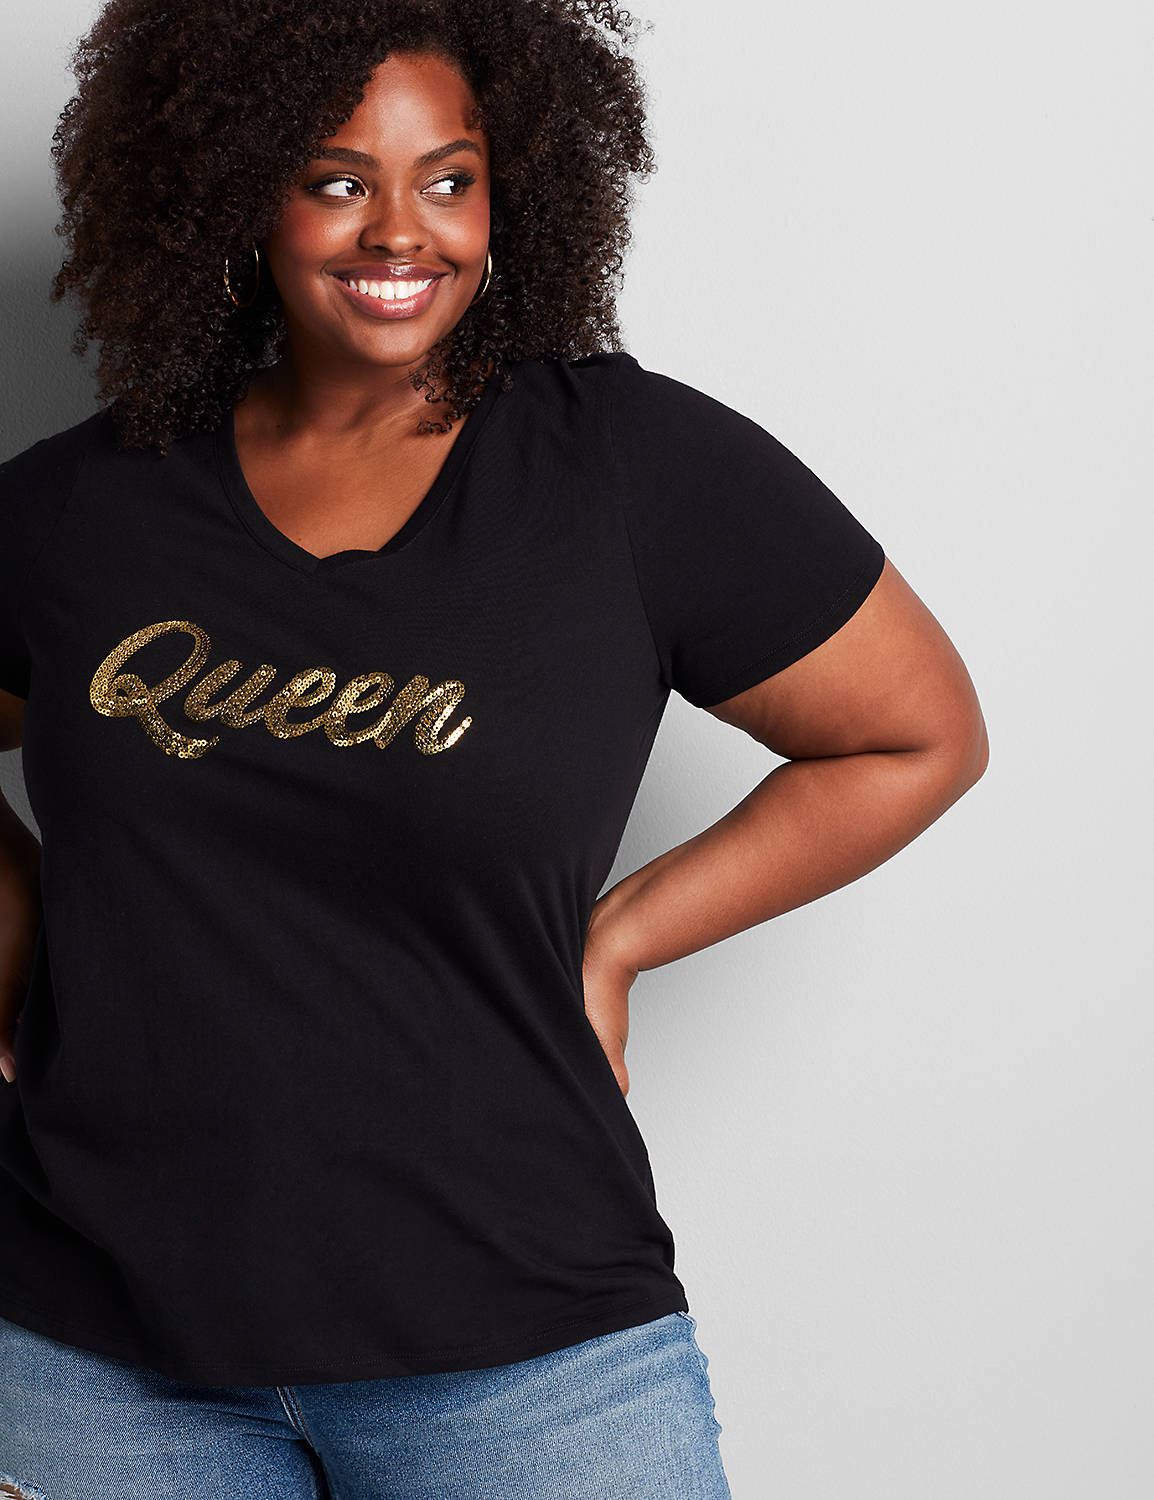 Short Sleeve VNeck Tee Graphic: Queen 1116341:Pitch Black LB 1000322:10/12 Product Image 1